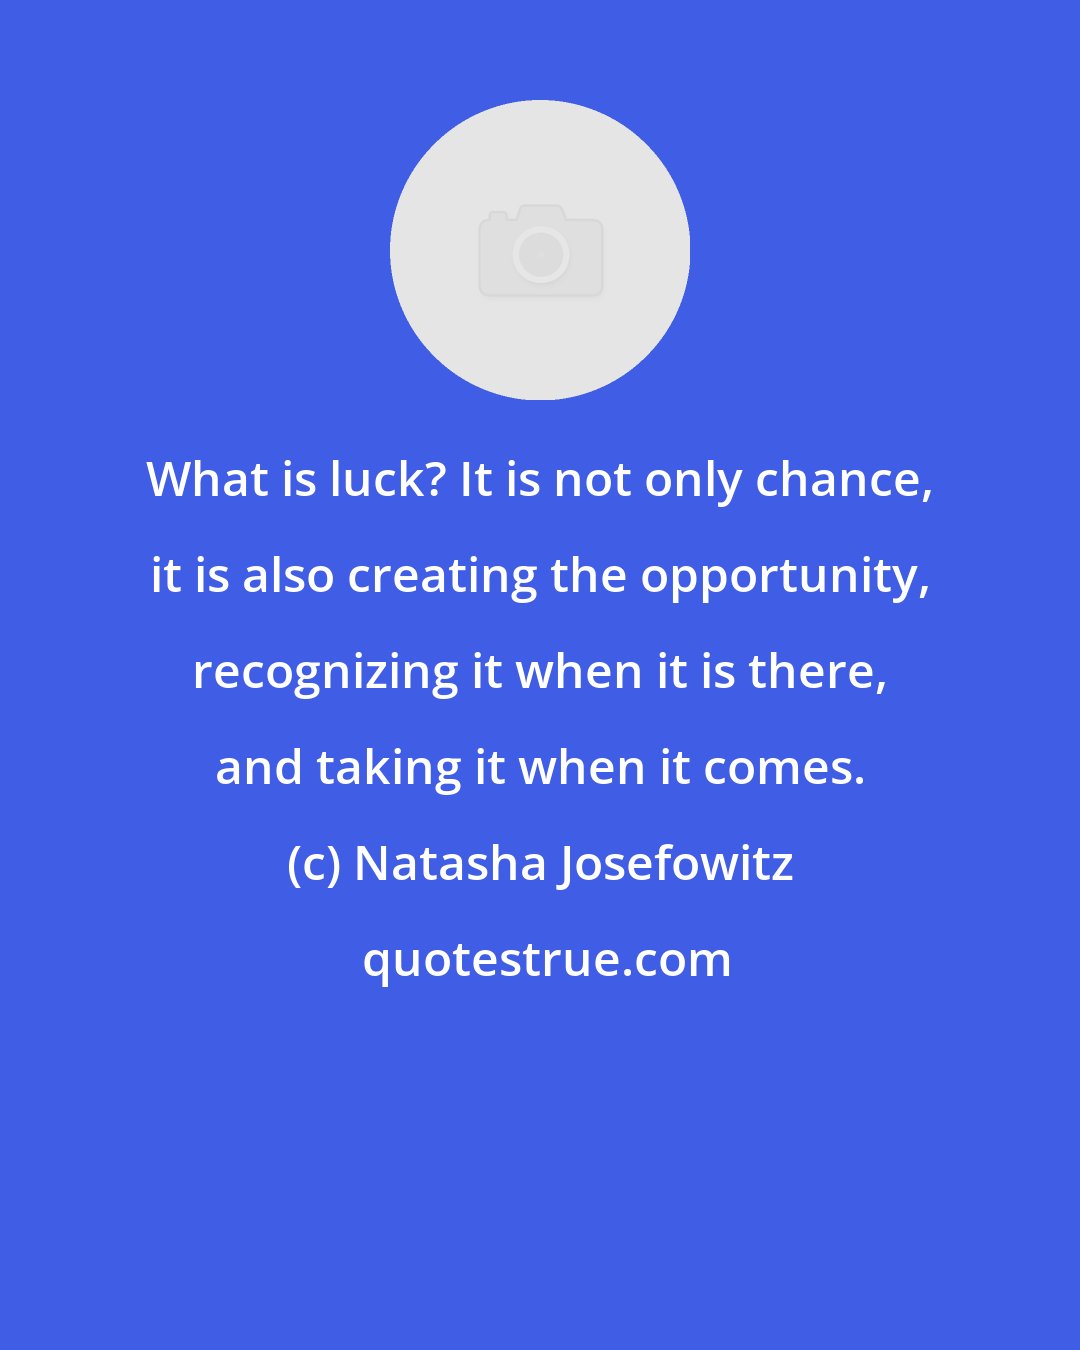 Natasha Josefowitz: What is luck? It is not only chance, it is also creating the opportunity, recognizing it when it is there, and taking it when it comes.